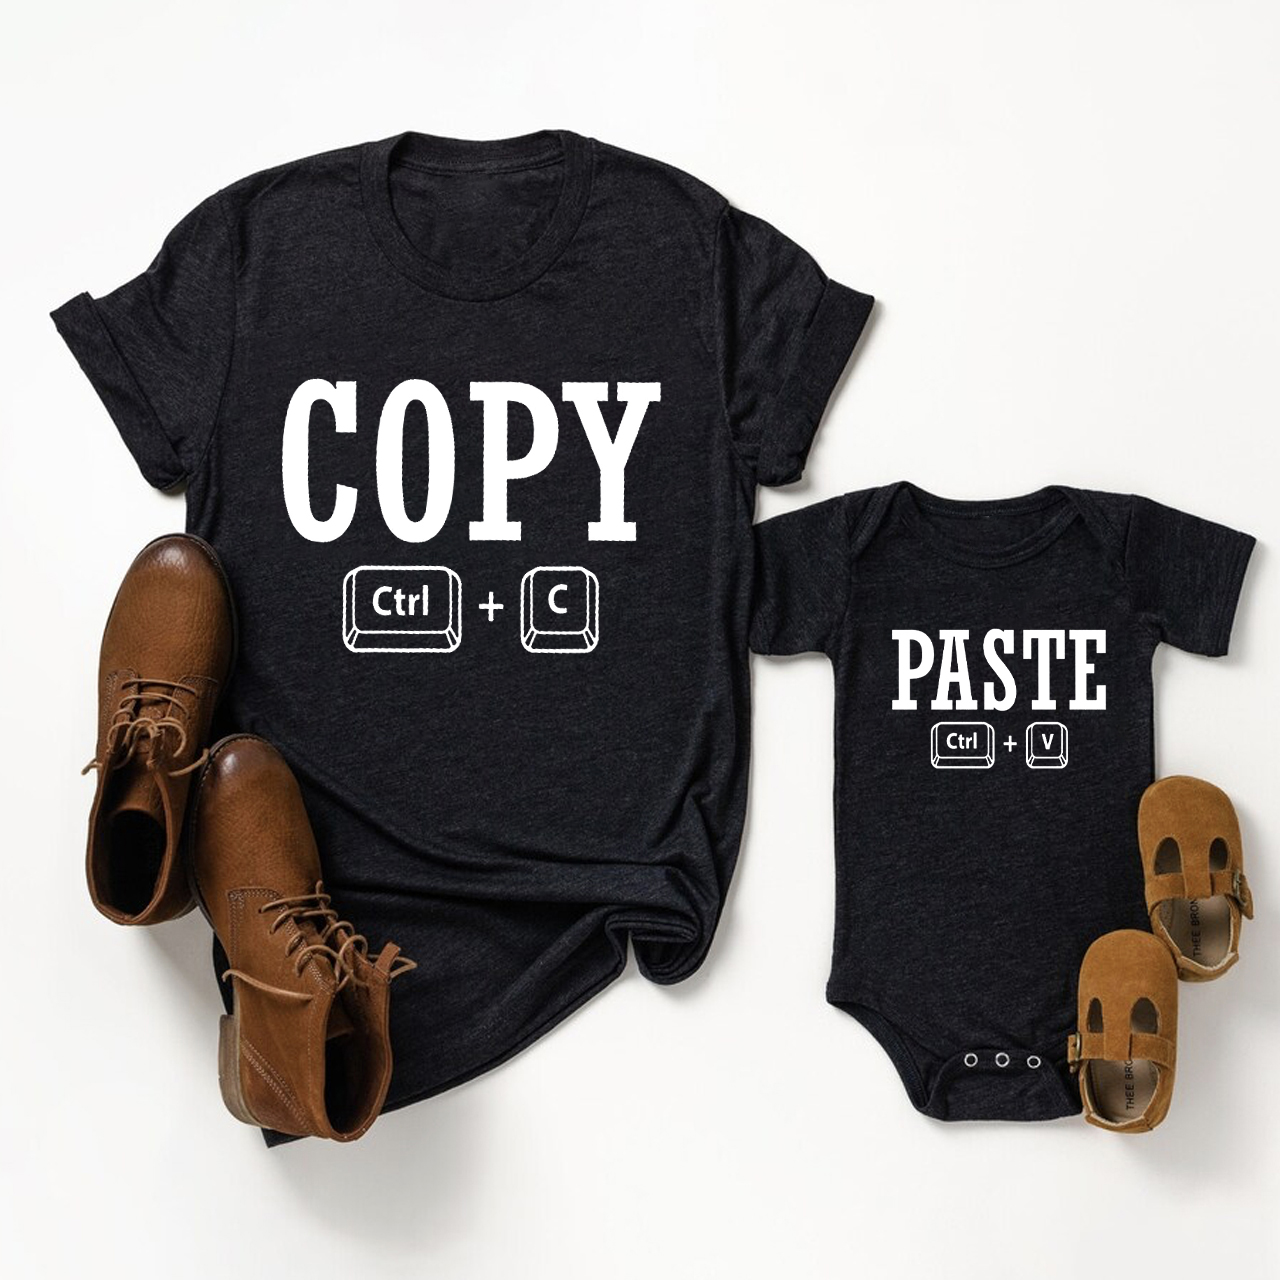 Copy Paste Matching Tees For Dad & Me